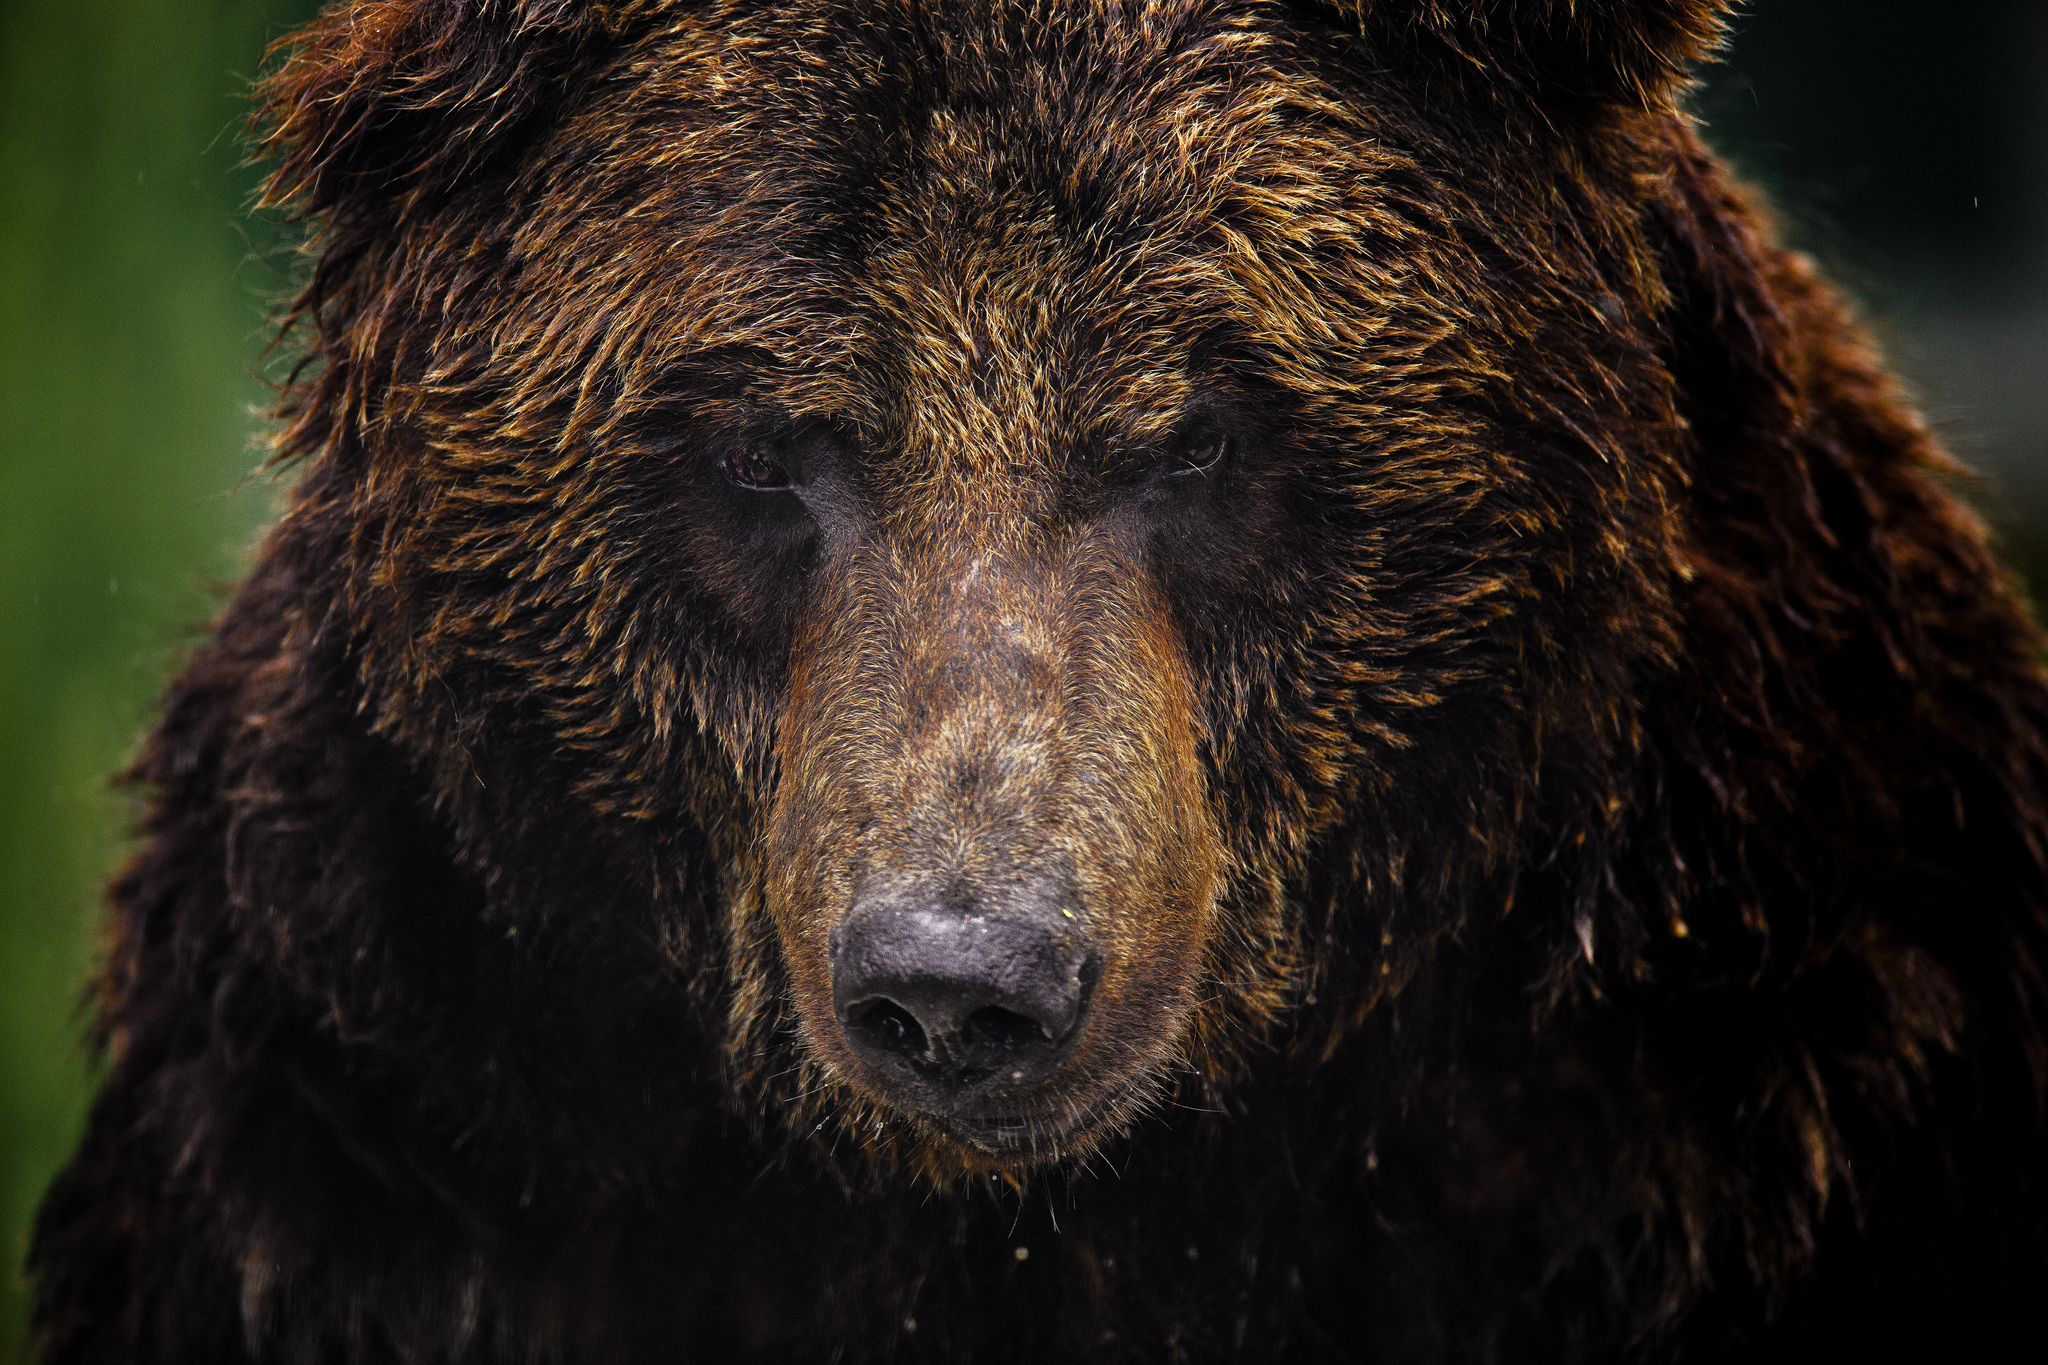 grizzly bear, animal, close up, face, bears